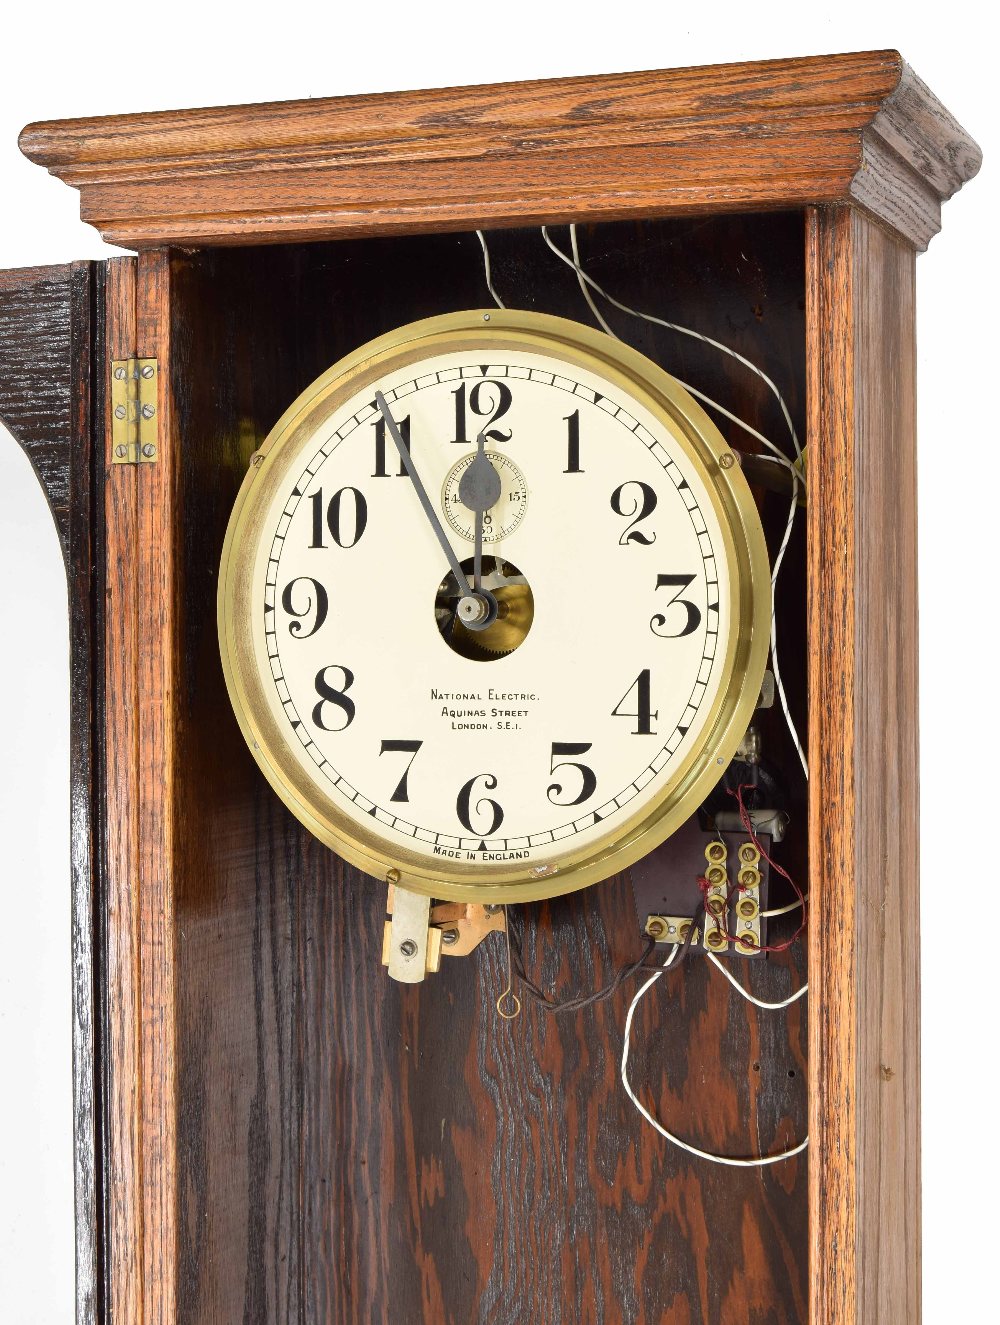 National electric master clock, the 9.25" cream dial inscribed National Electric, Aquinas Street, - Image 2 of 2